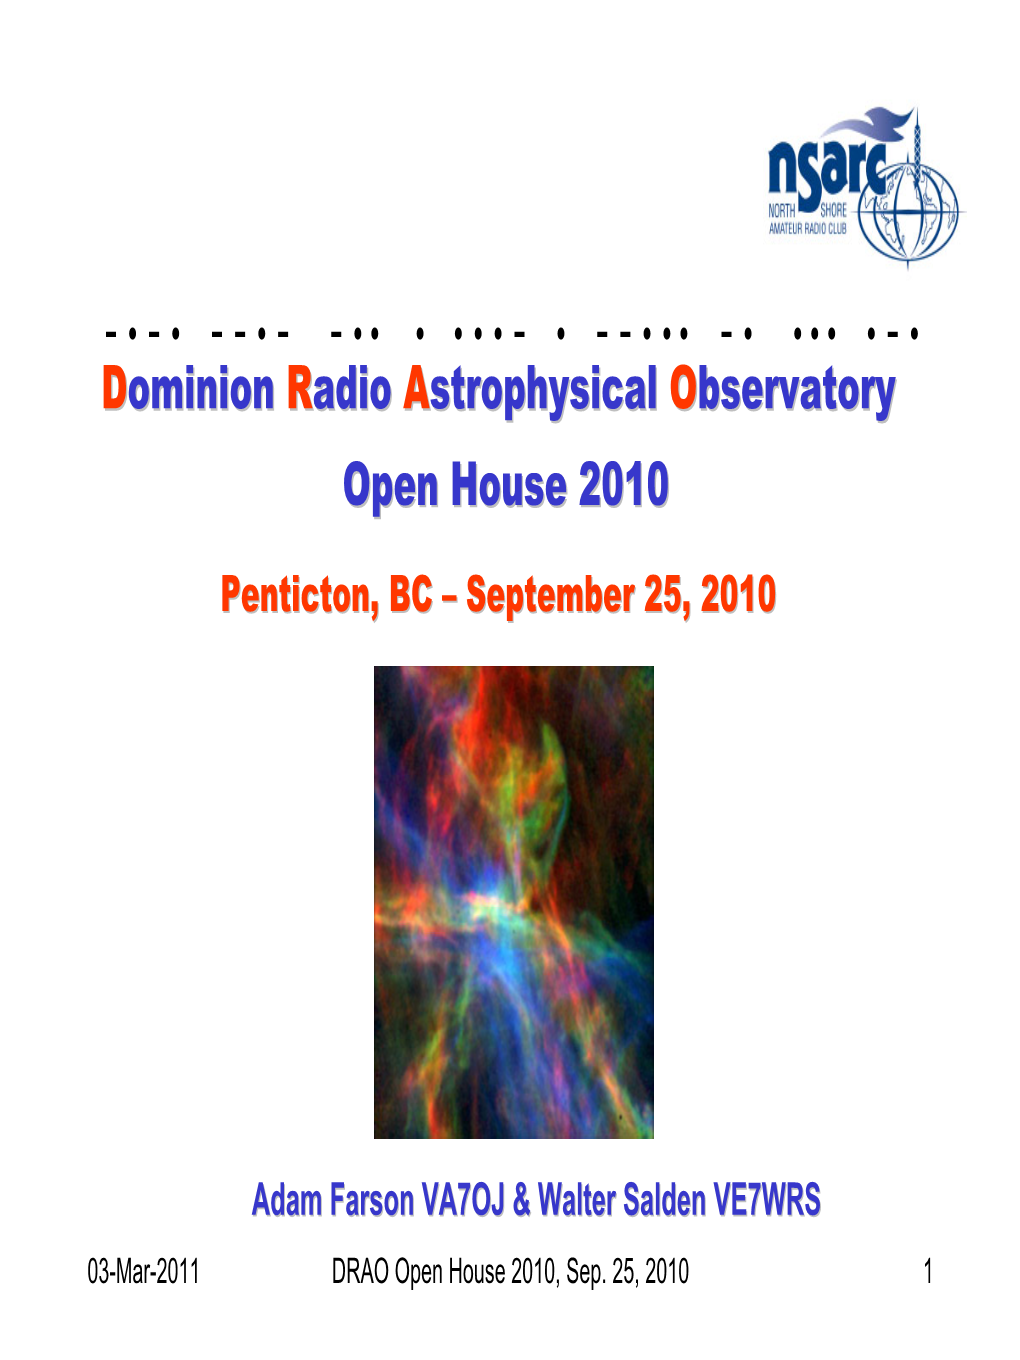 Dominion Radio-Astrophysical Observatory